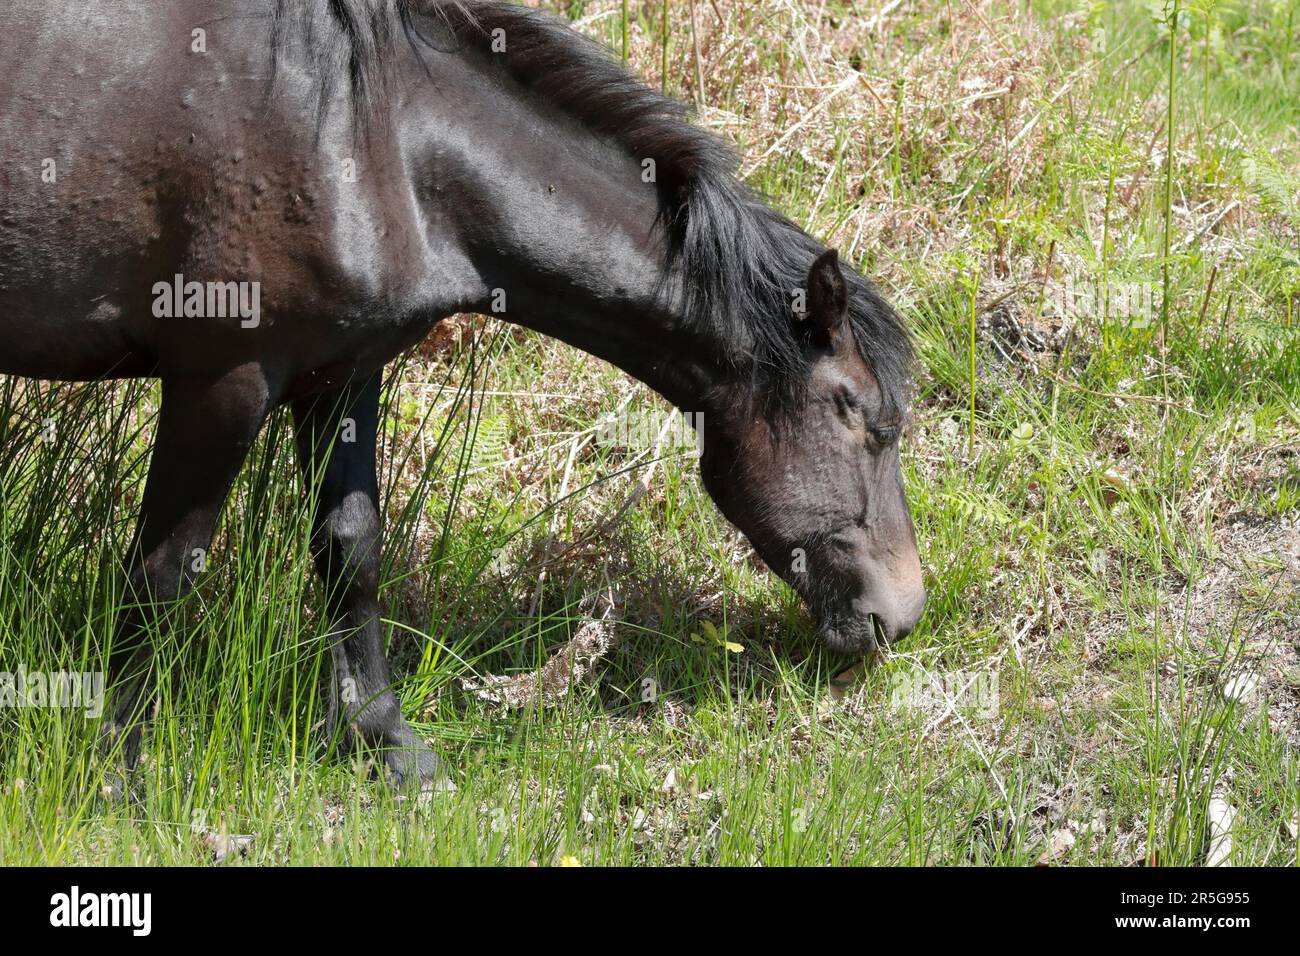 A dark brown New Forest pony grazing on the grass, front half only Stock Photo